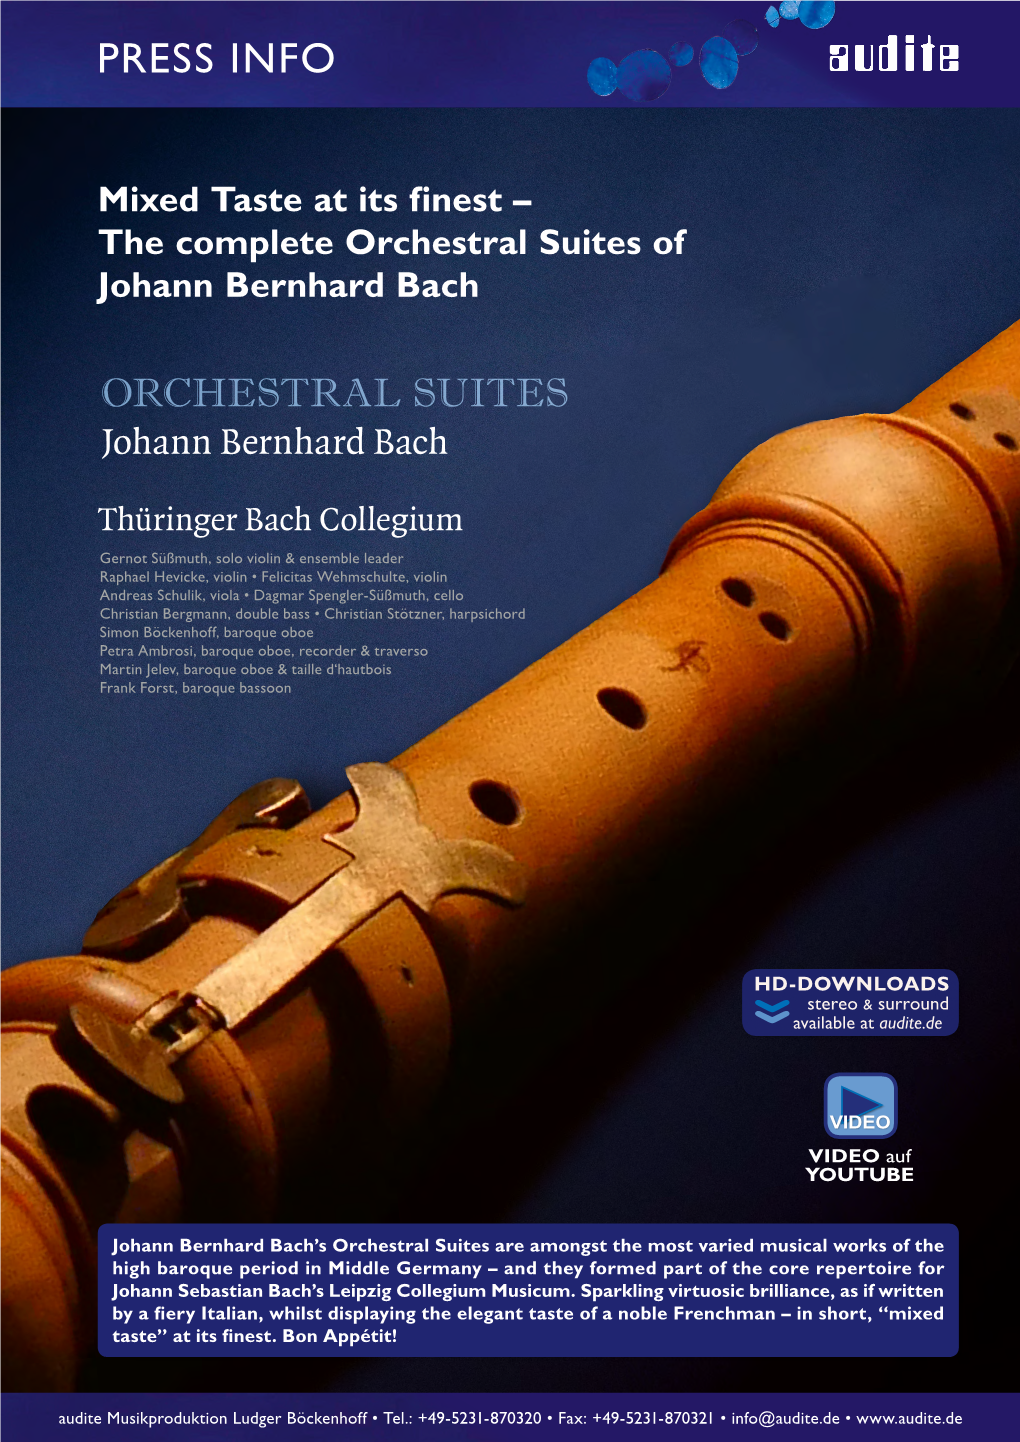 The Complete Orchestral Suites of Johann Bernhard Bach